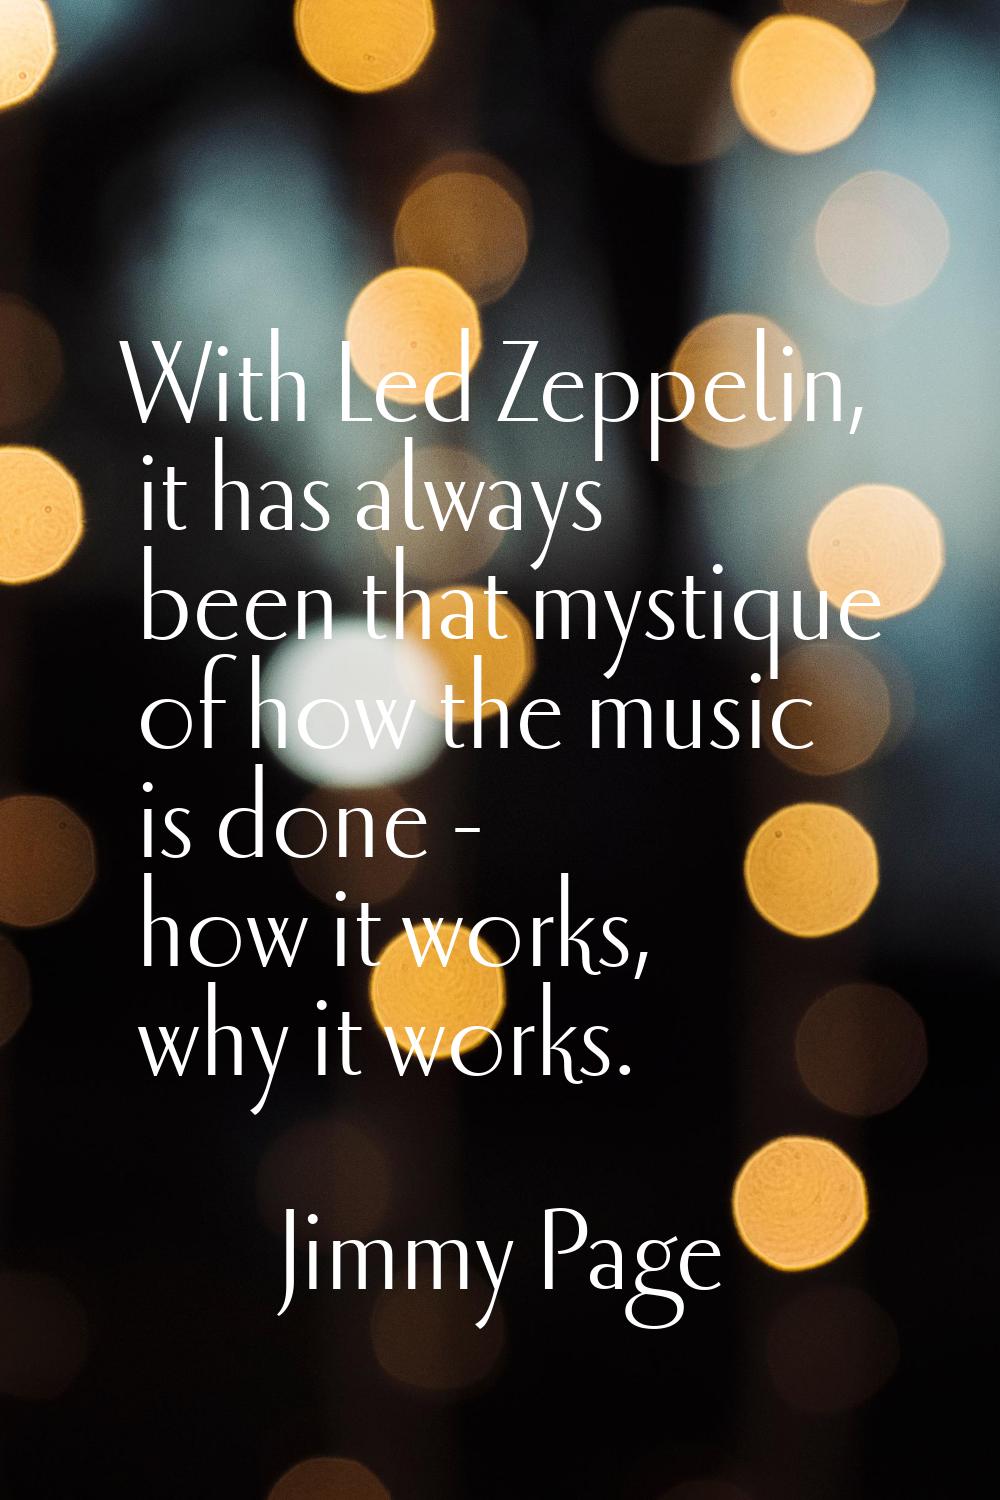 With Led Zeppelin, it has always been that mystique of how the music is done - how it works, why it